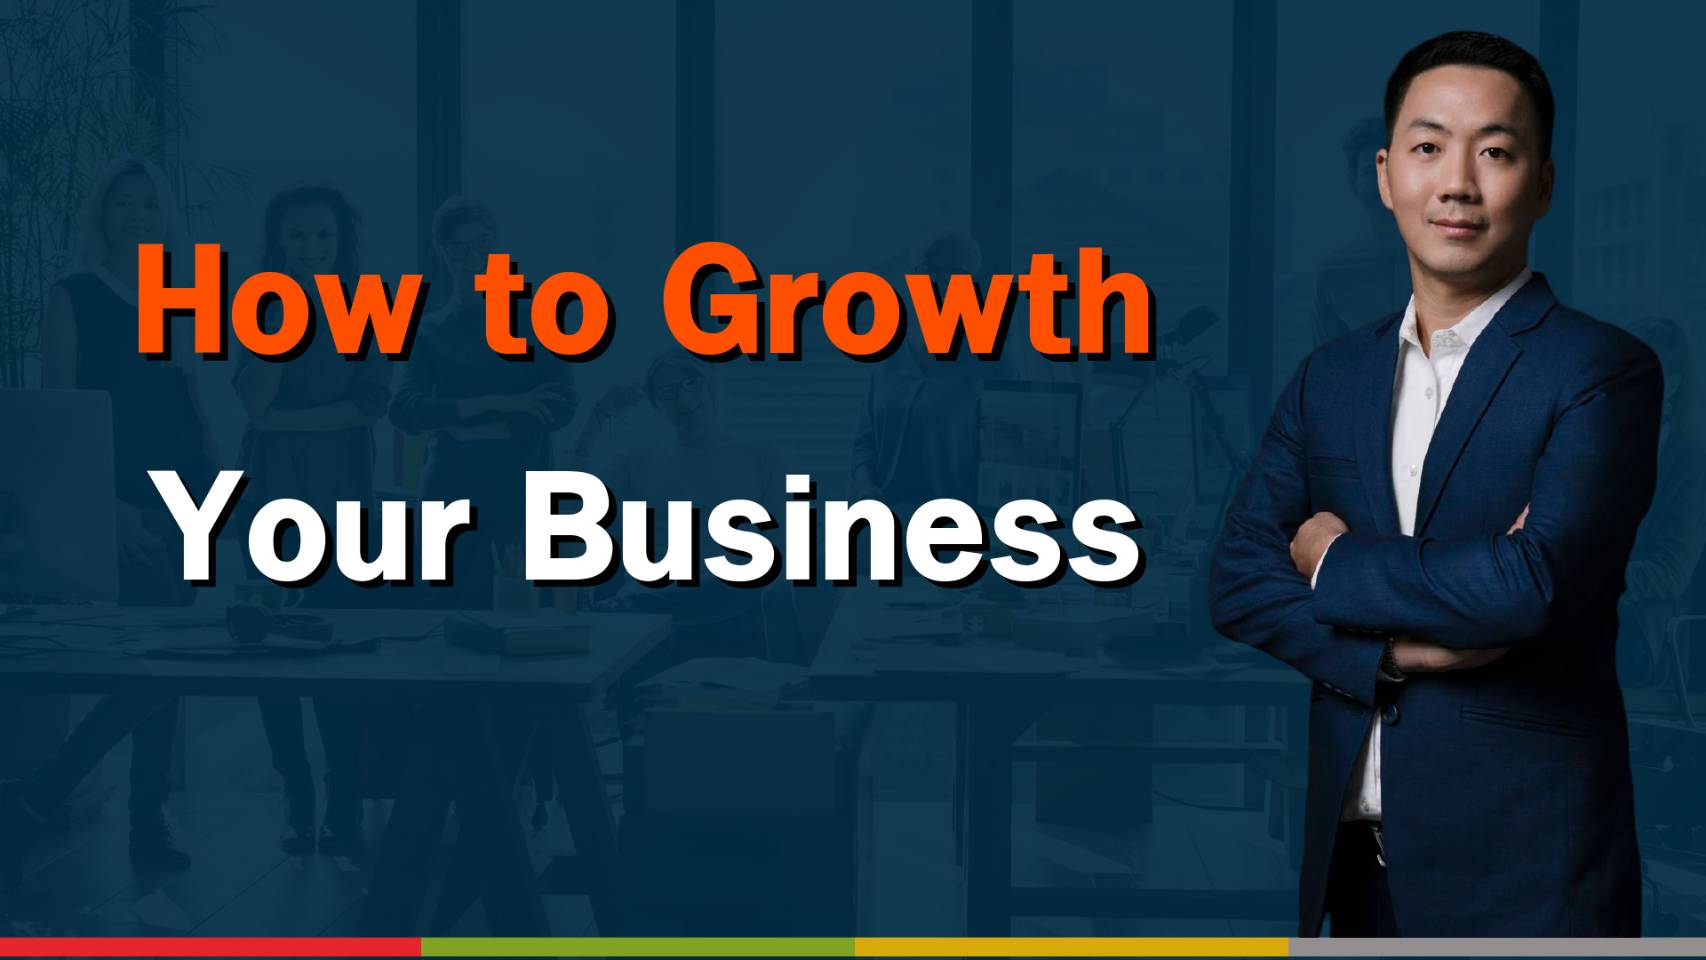 How to Growth You Business